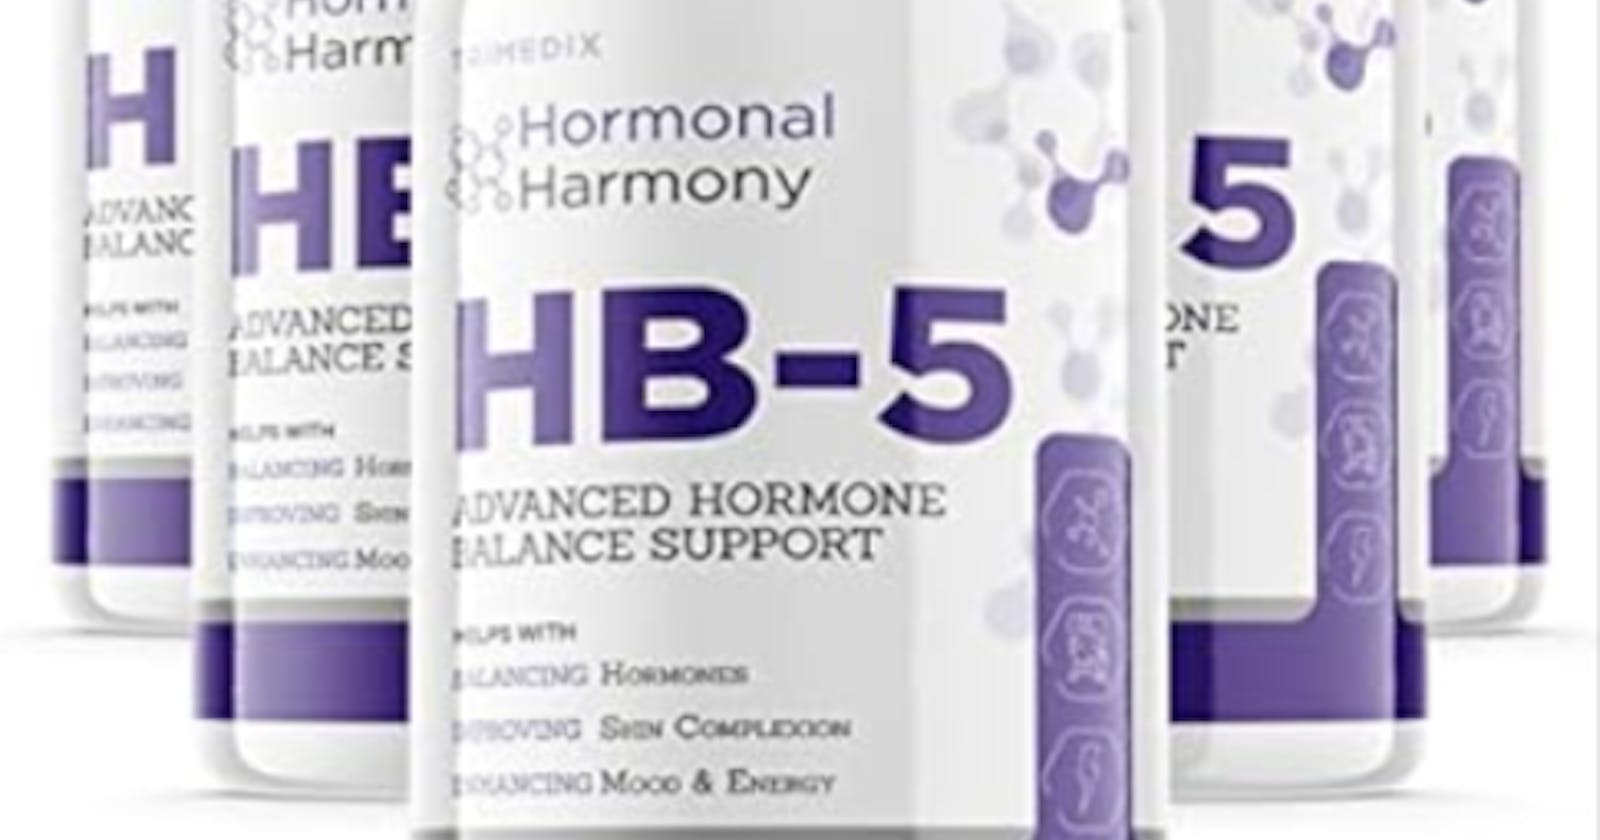 Hormonal Harmony HB-5 Supplement - Should You Buy or Waste of Money?